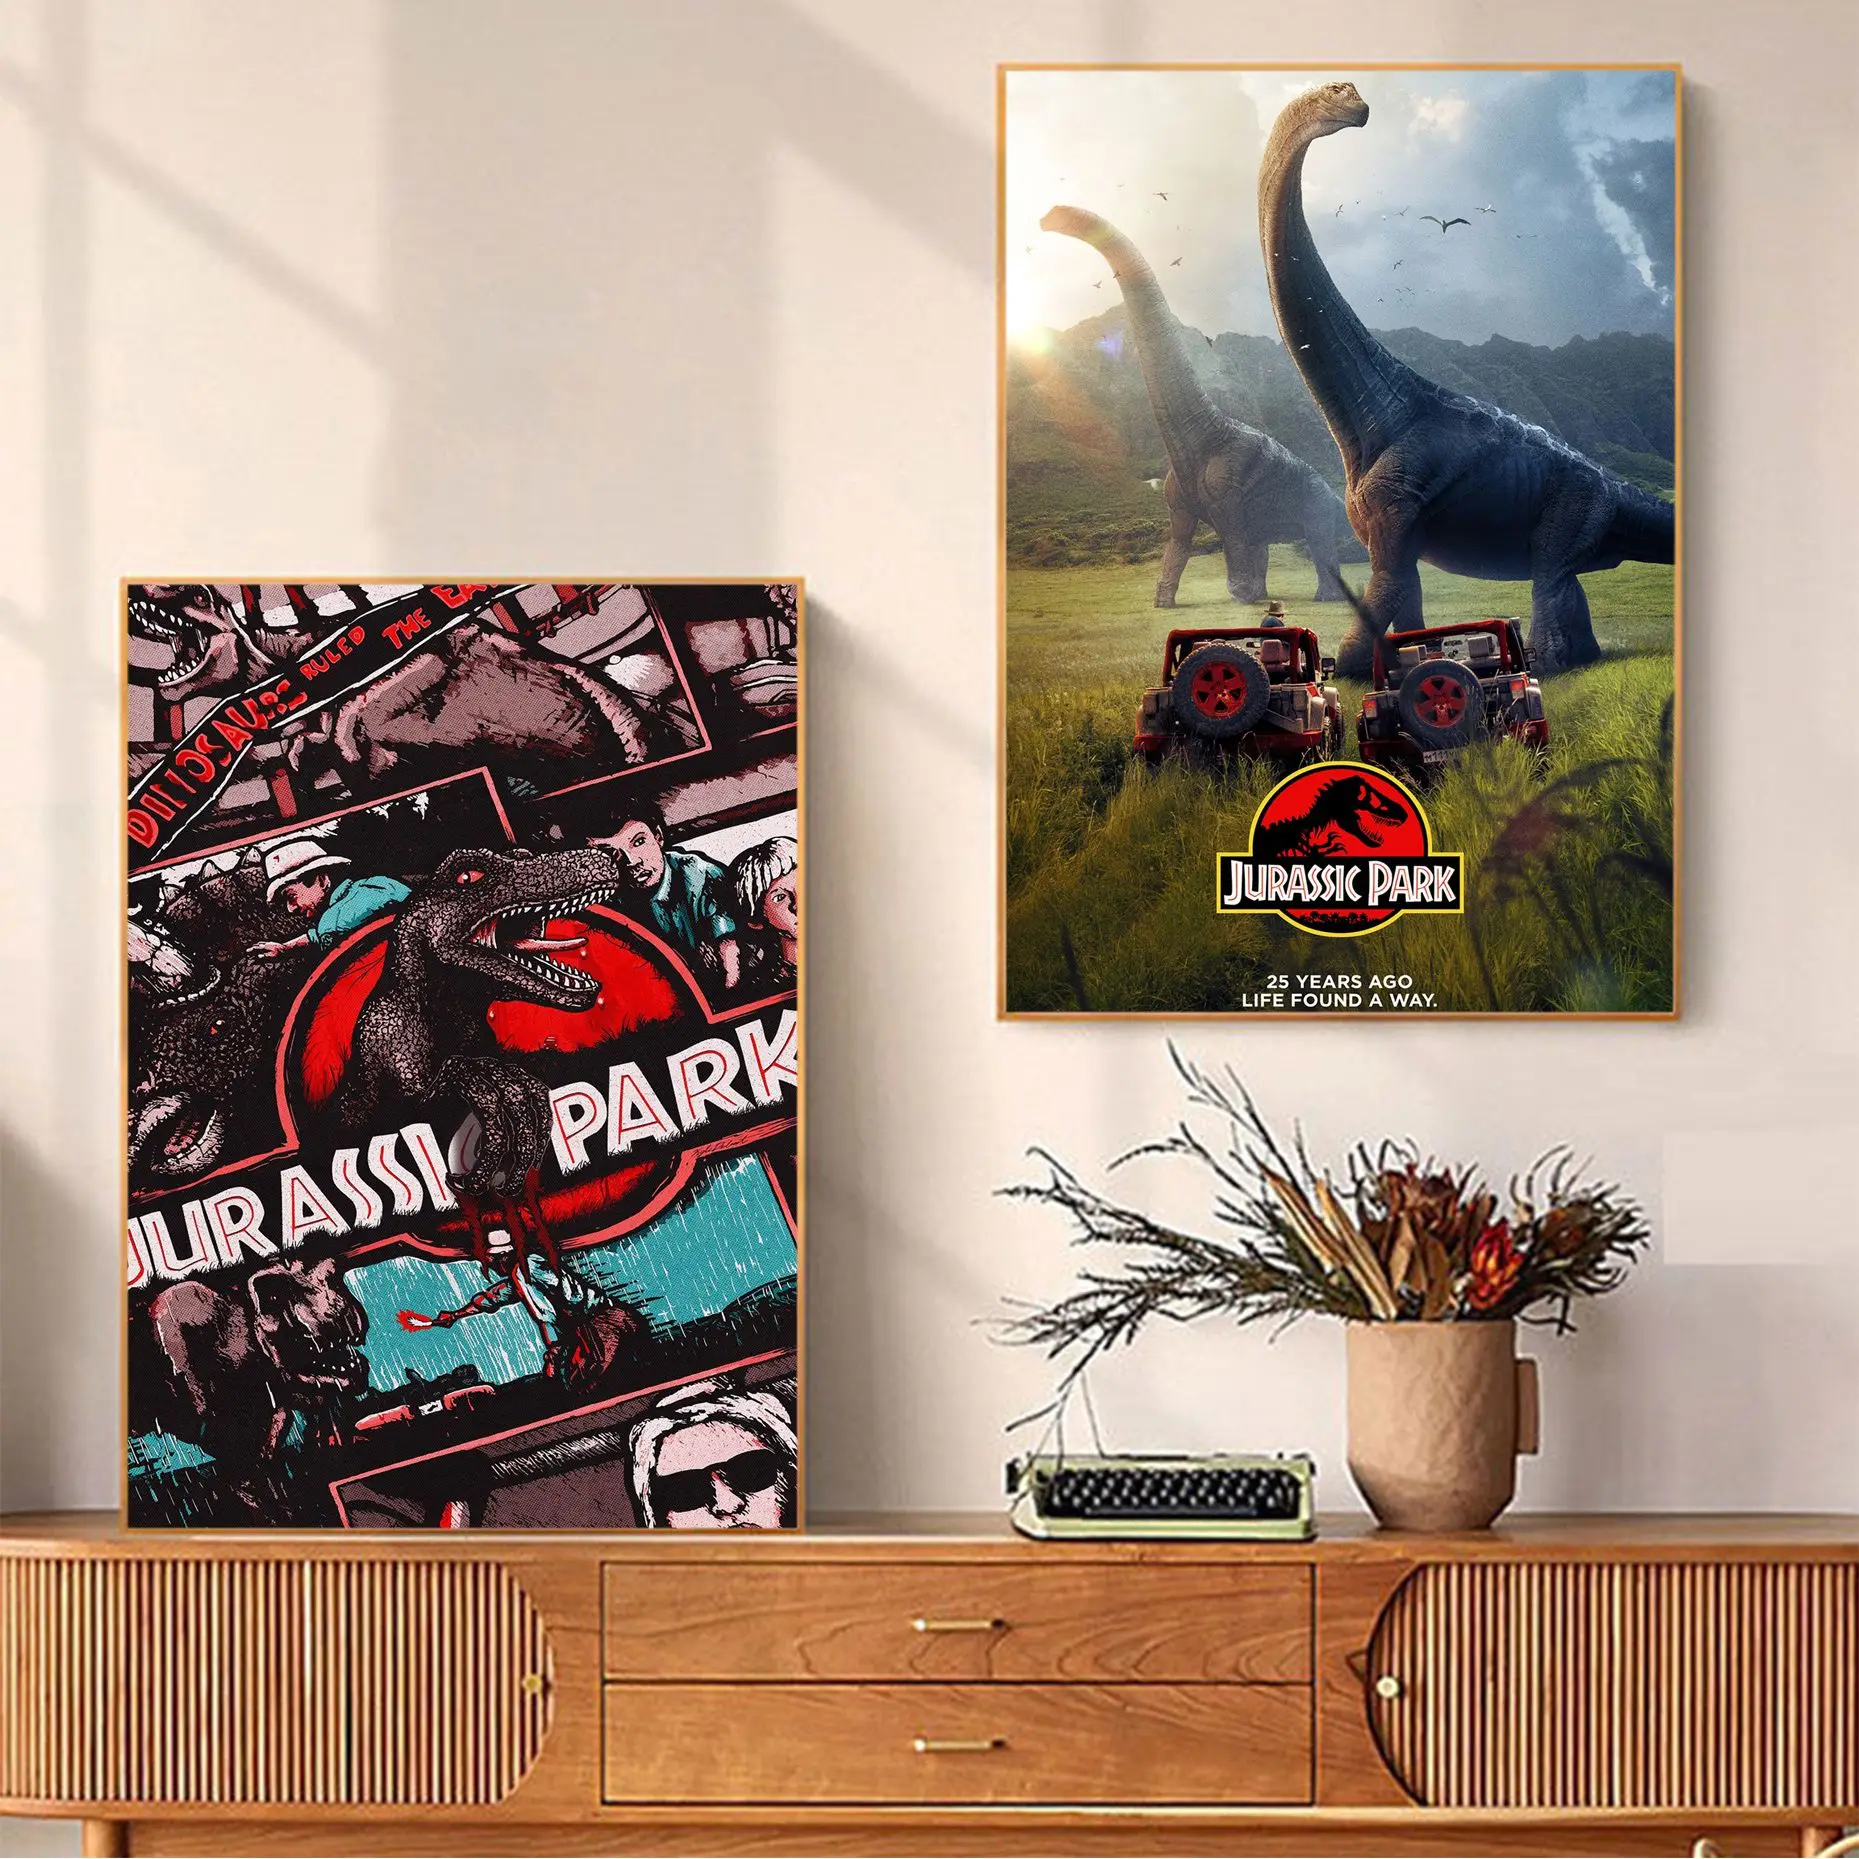 

Jurassic Park Movie Whitepaper Poster HD Quality Poster Wall Art Painting Study Decor Art Wall Stickers